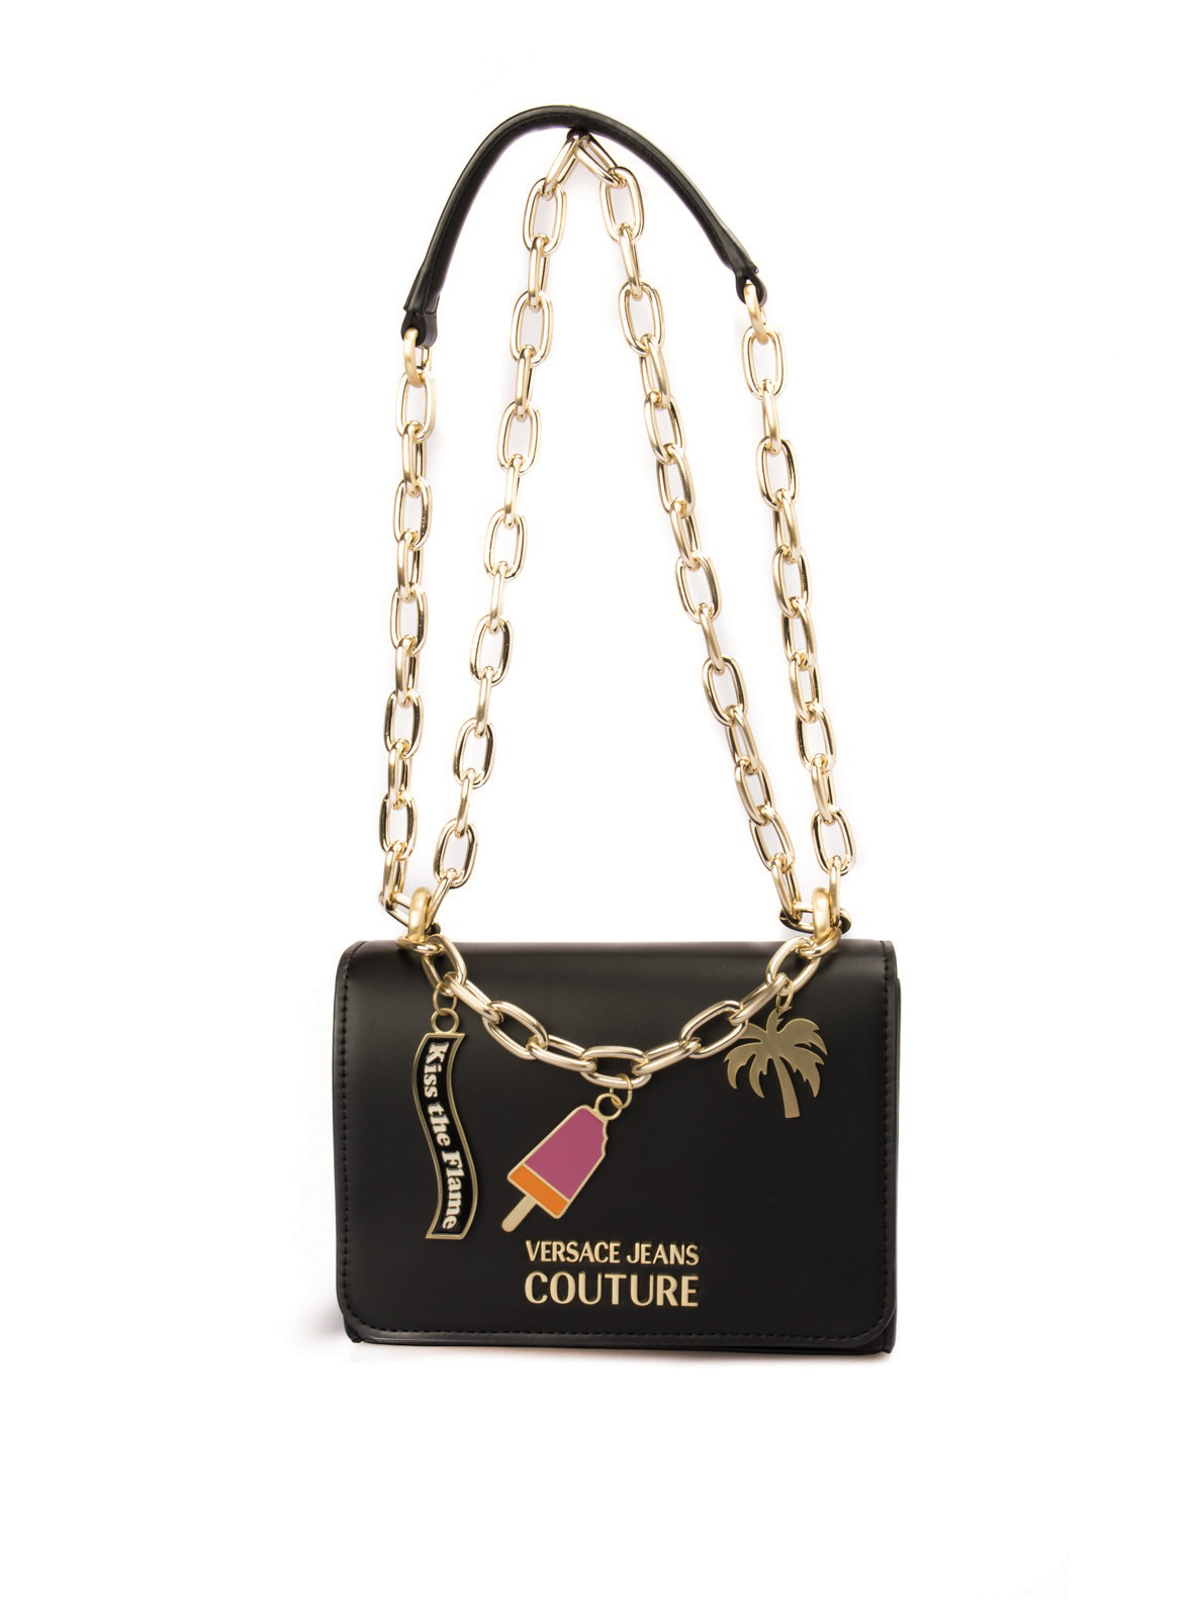 VERSACE JEANS COUTURE CHARM CROSS BODY BAG